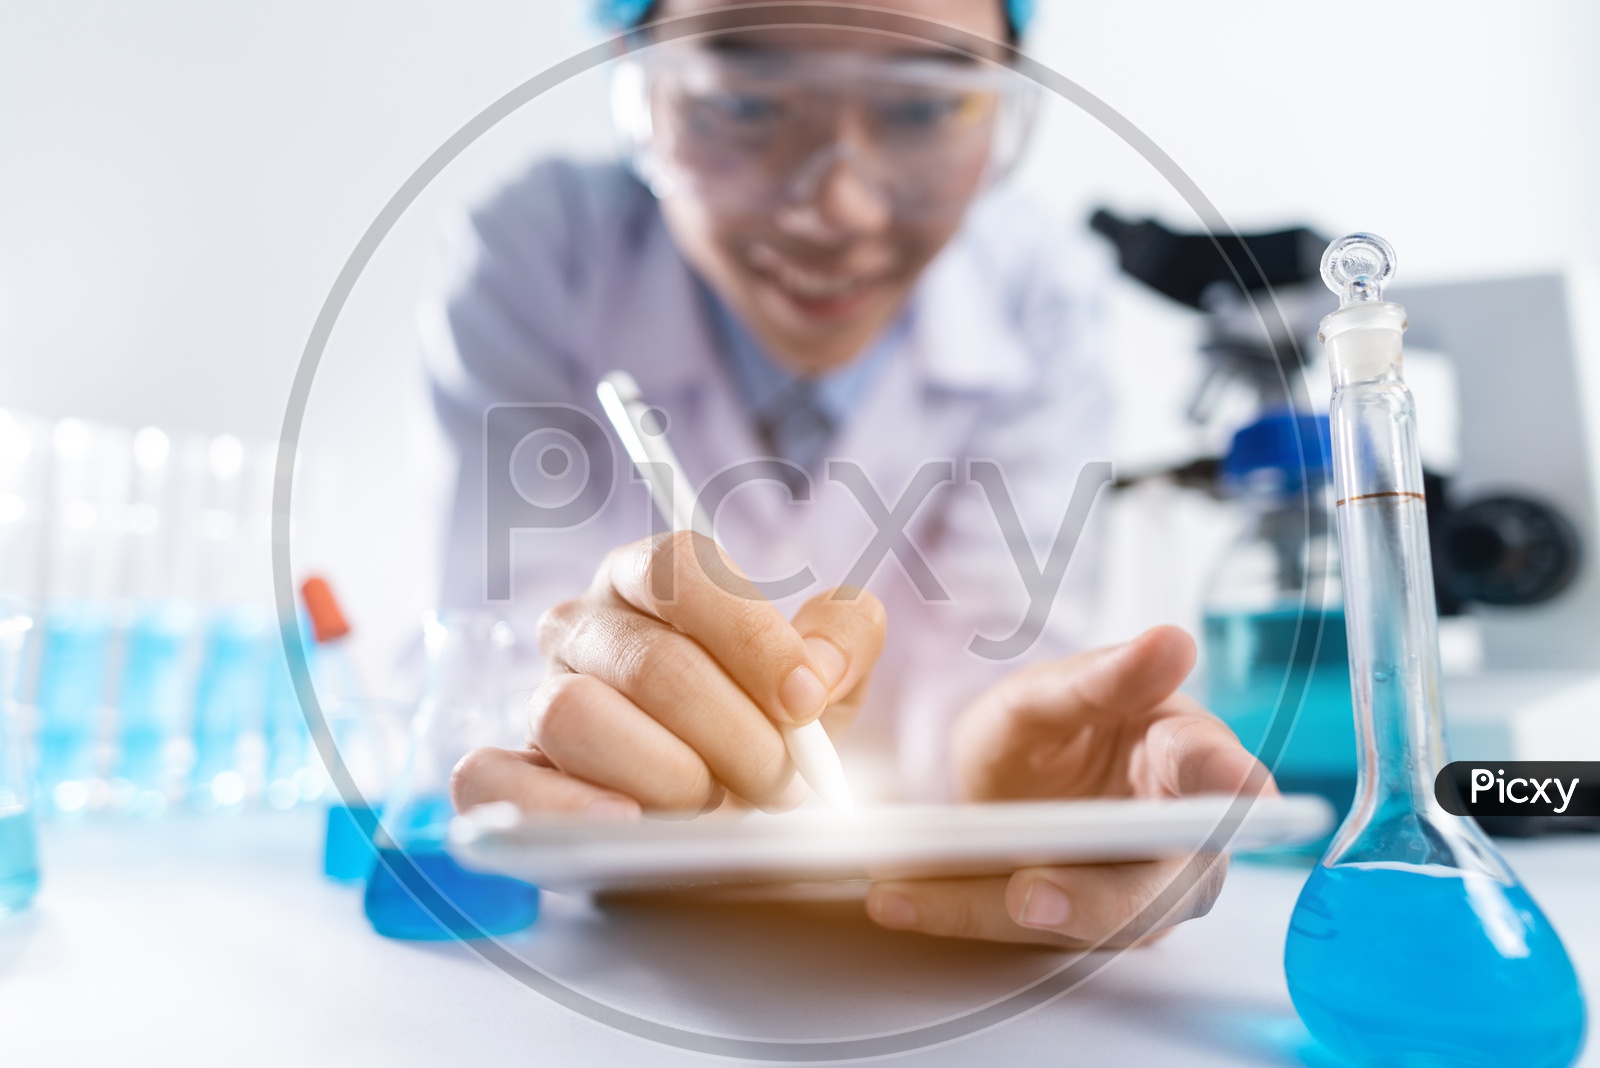 Asian Woman Scientist or Medical Student Working on her iPad at Laboratory